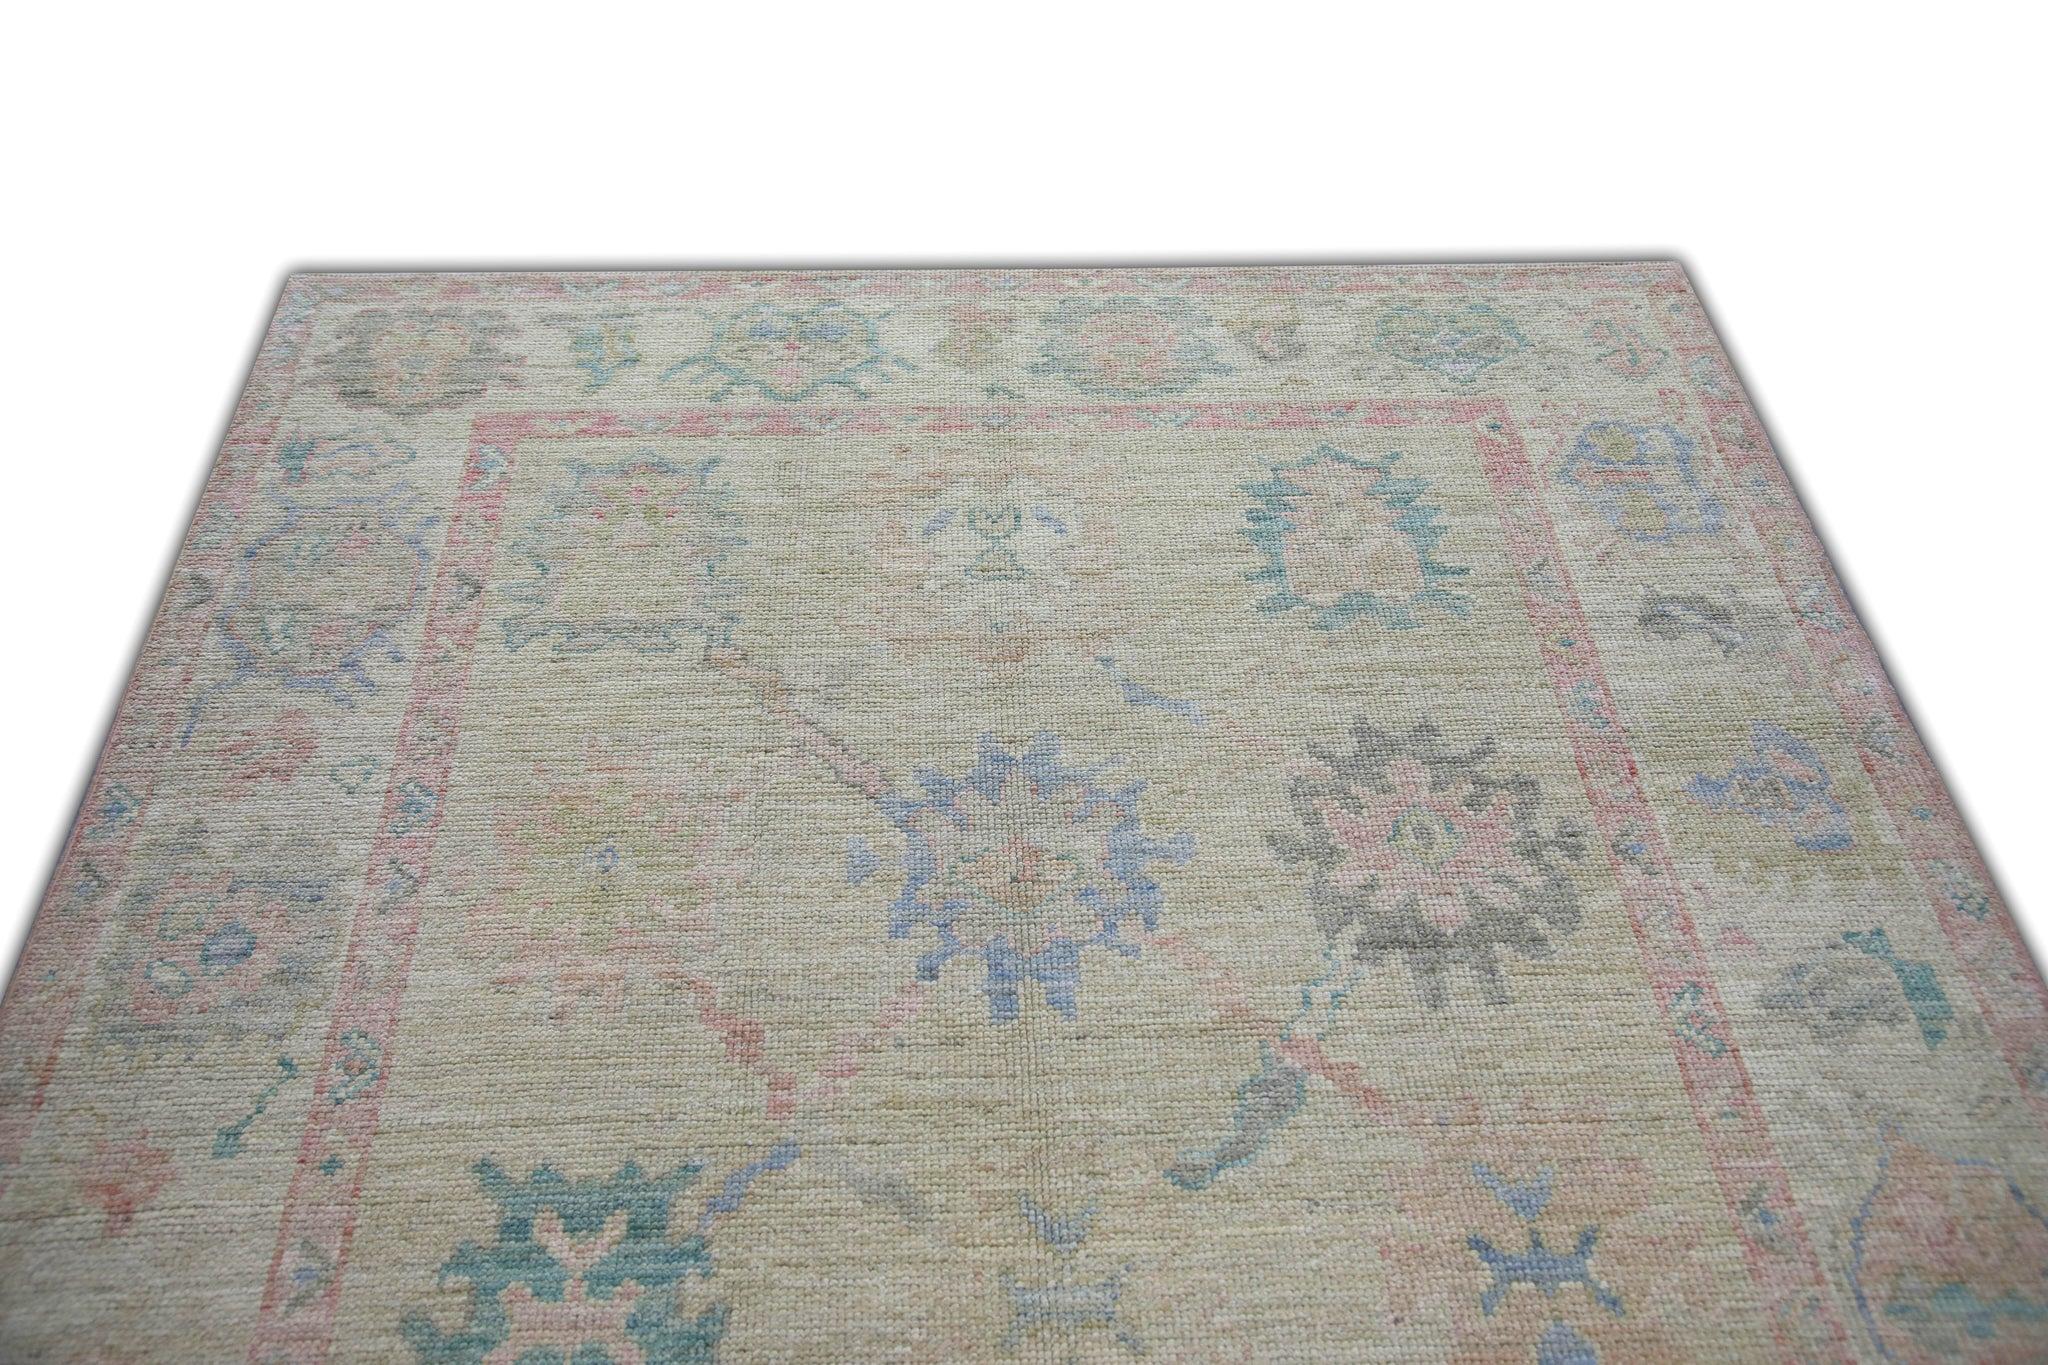 Multicolor Floral Handwoven Wool Turkish Oushak Rug 5' x 6'9